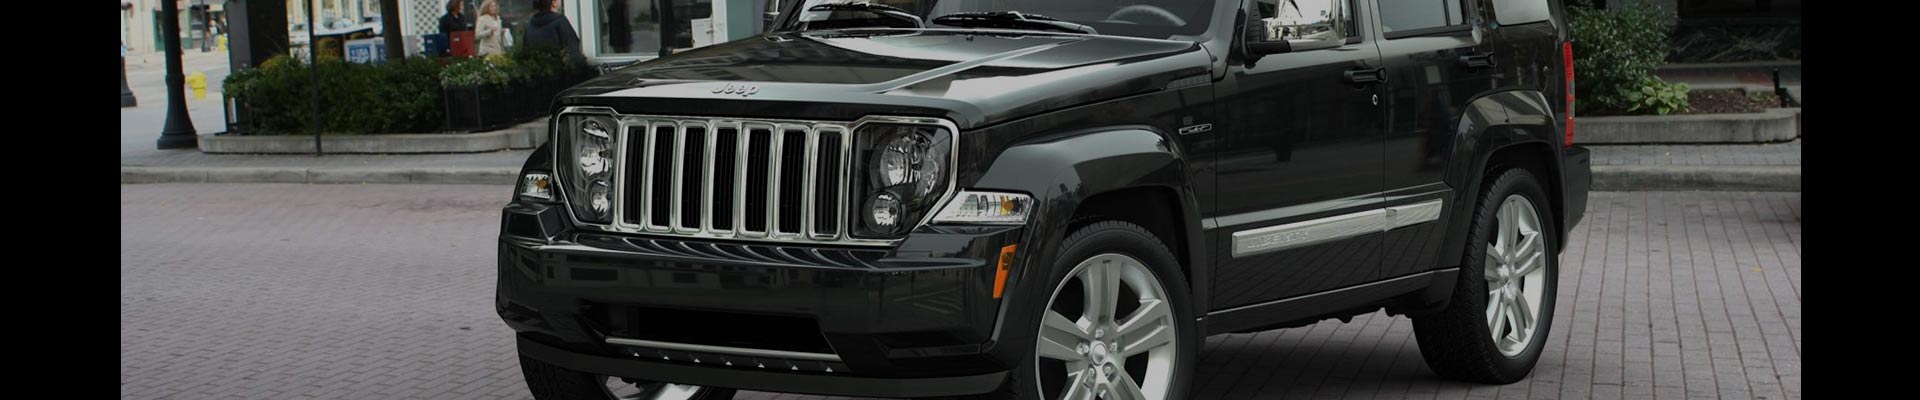 Shop Replacement and OEM 2002 Jeep Liberty Parts with Discounted Price on the Net